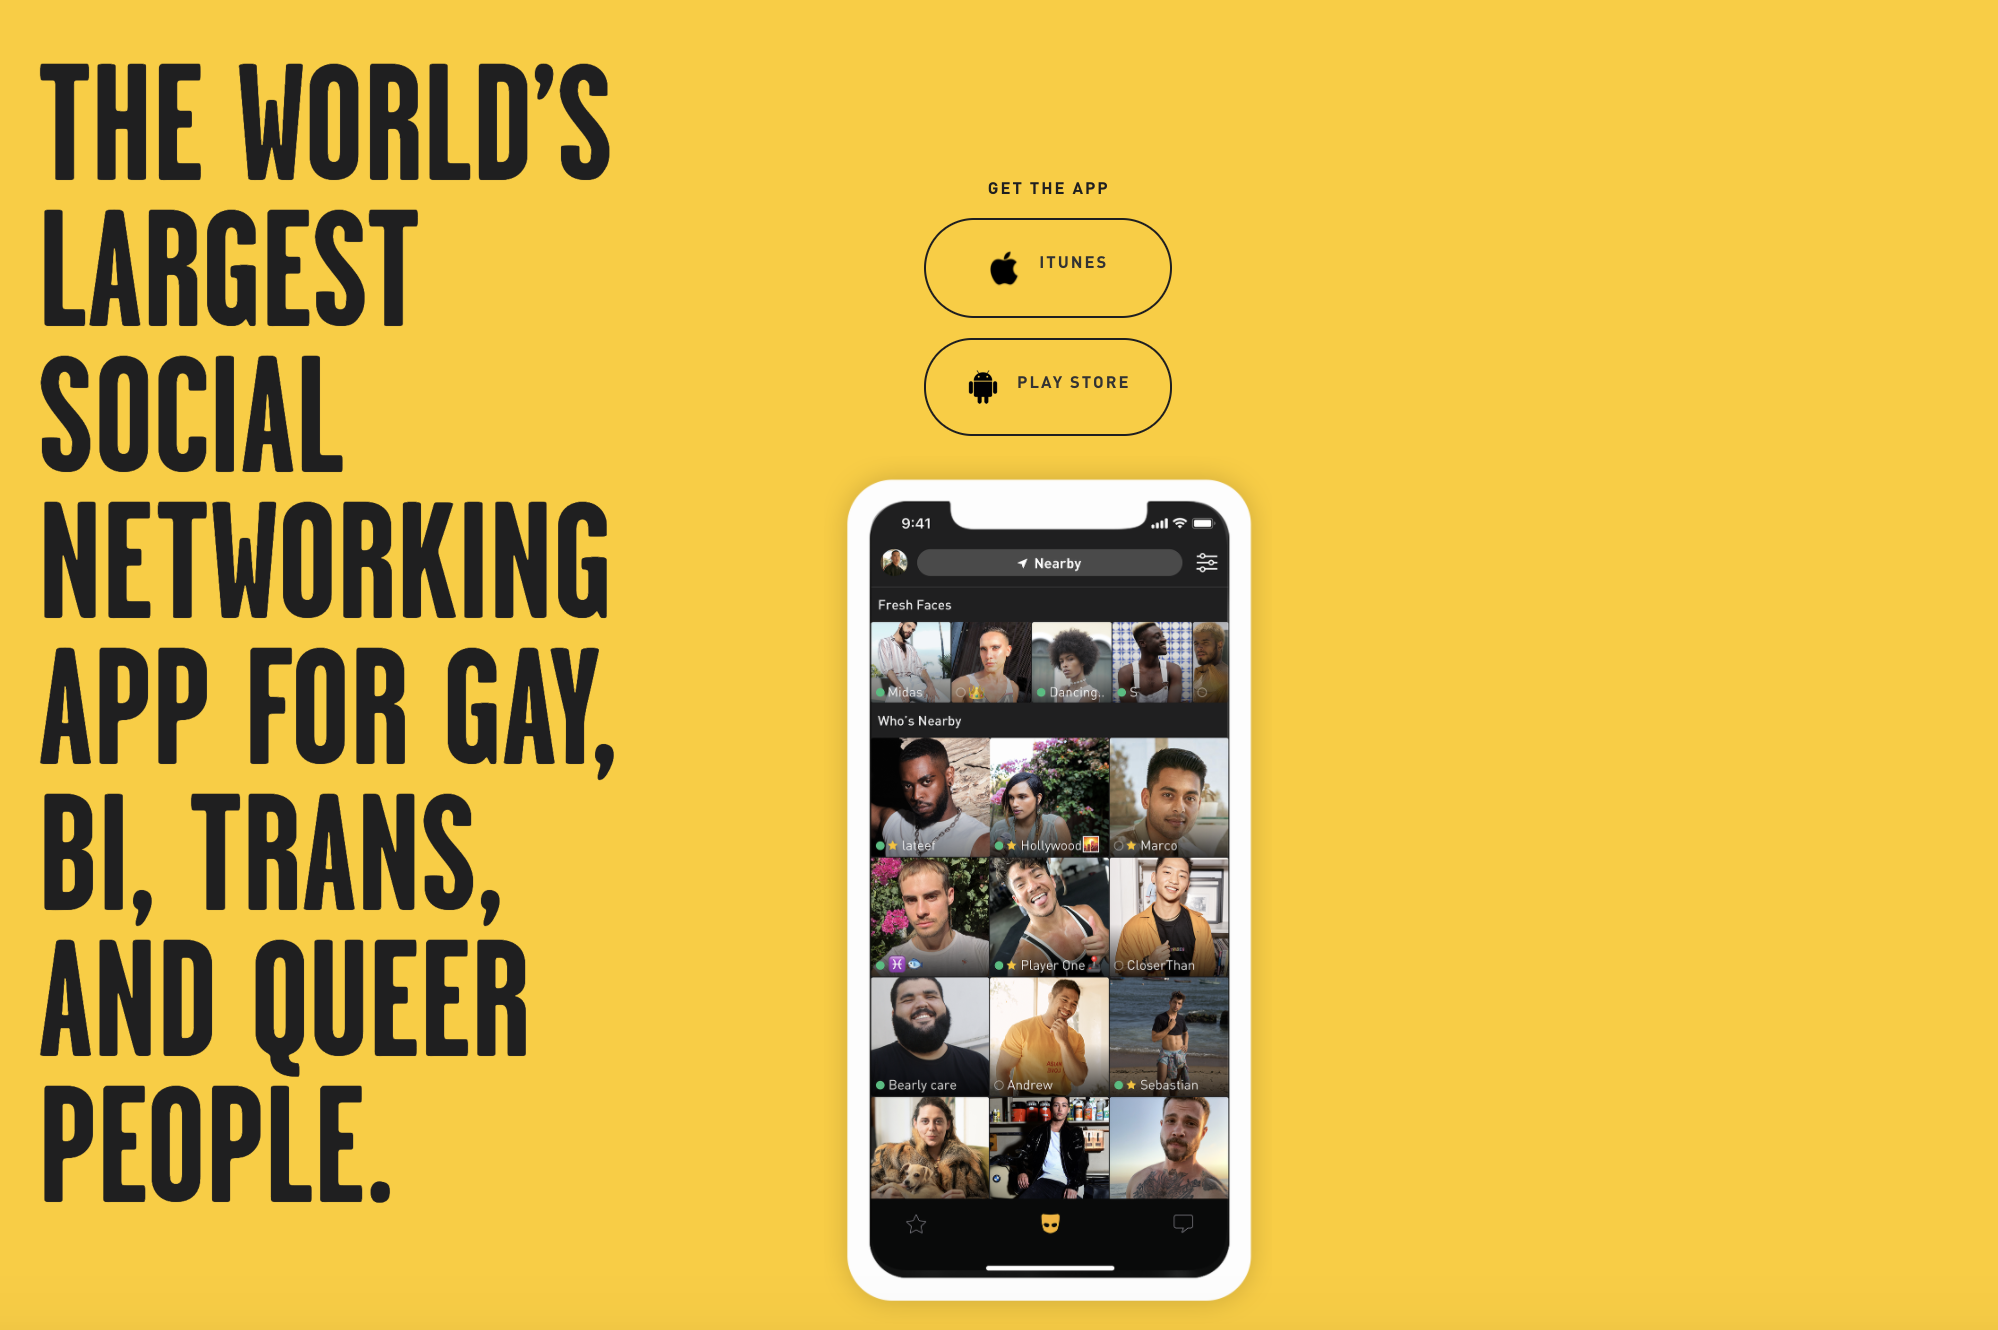 Grindr will also donate to the Marsha P. Johnson Institute in observation of Pride month.